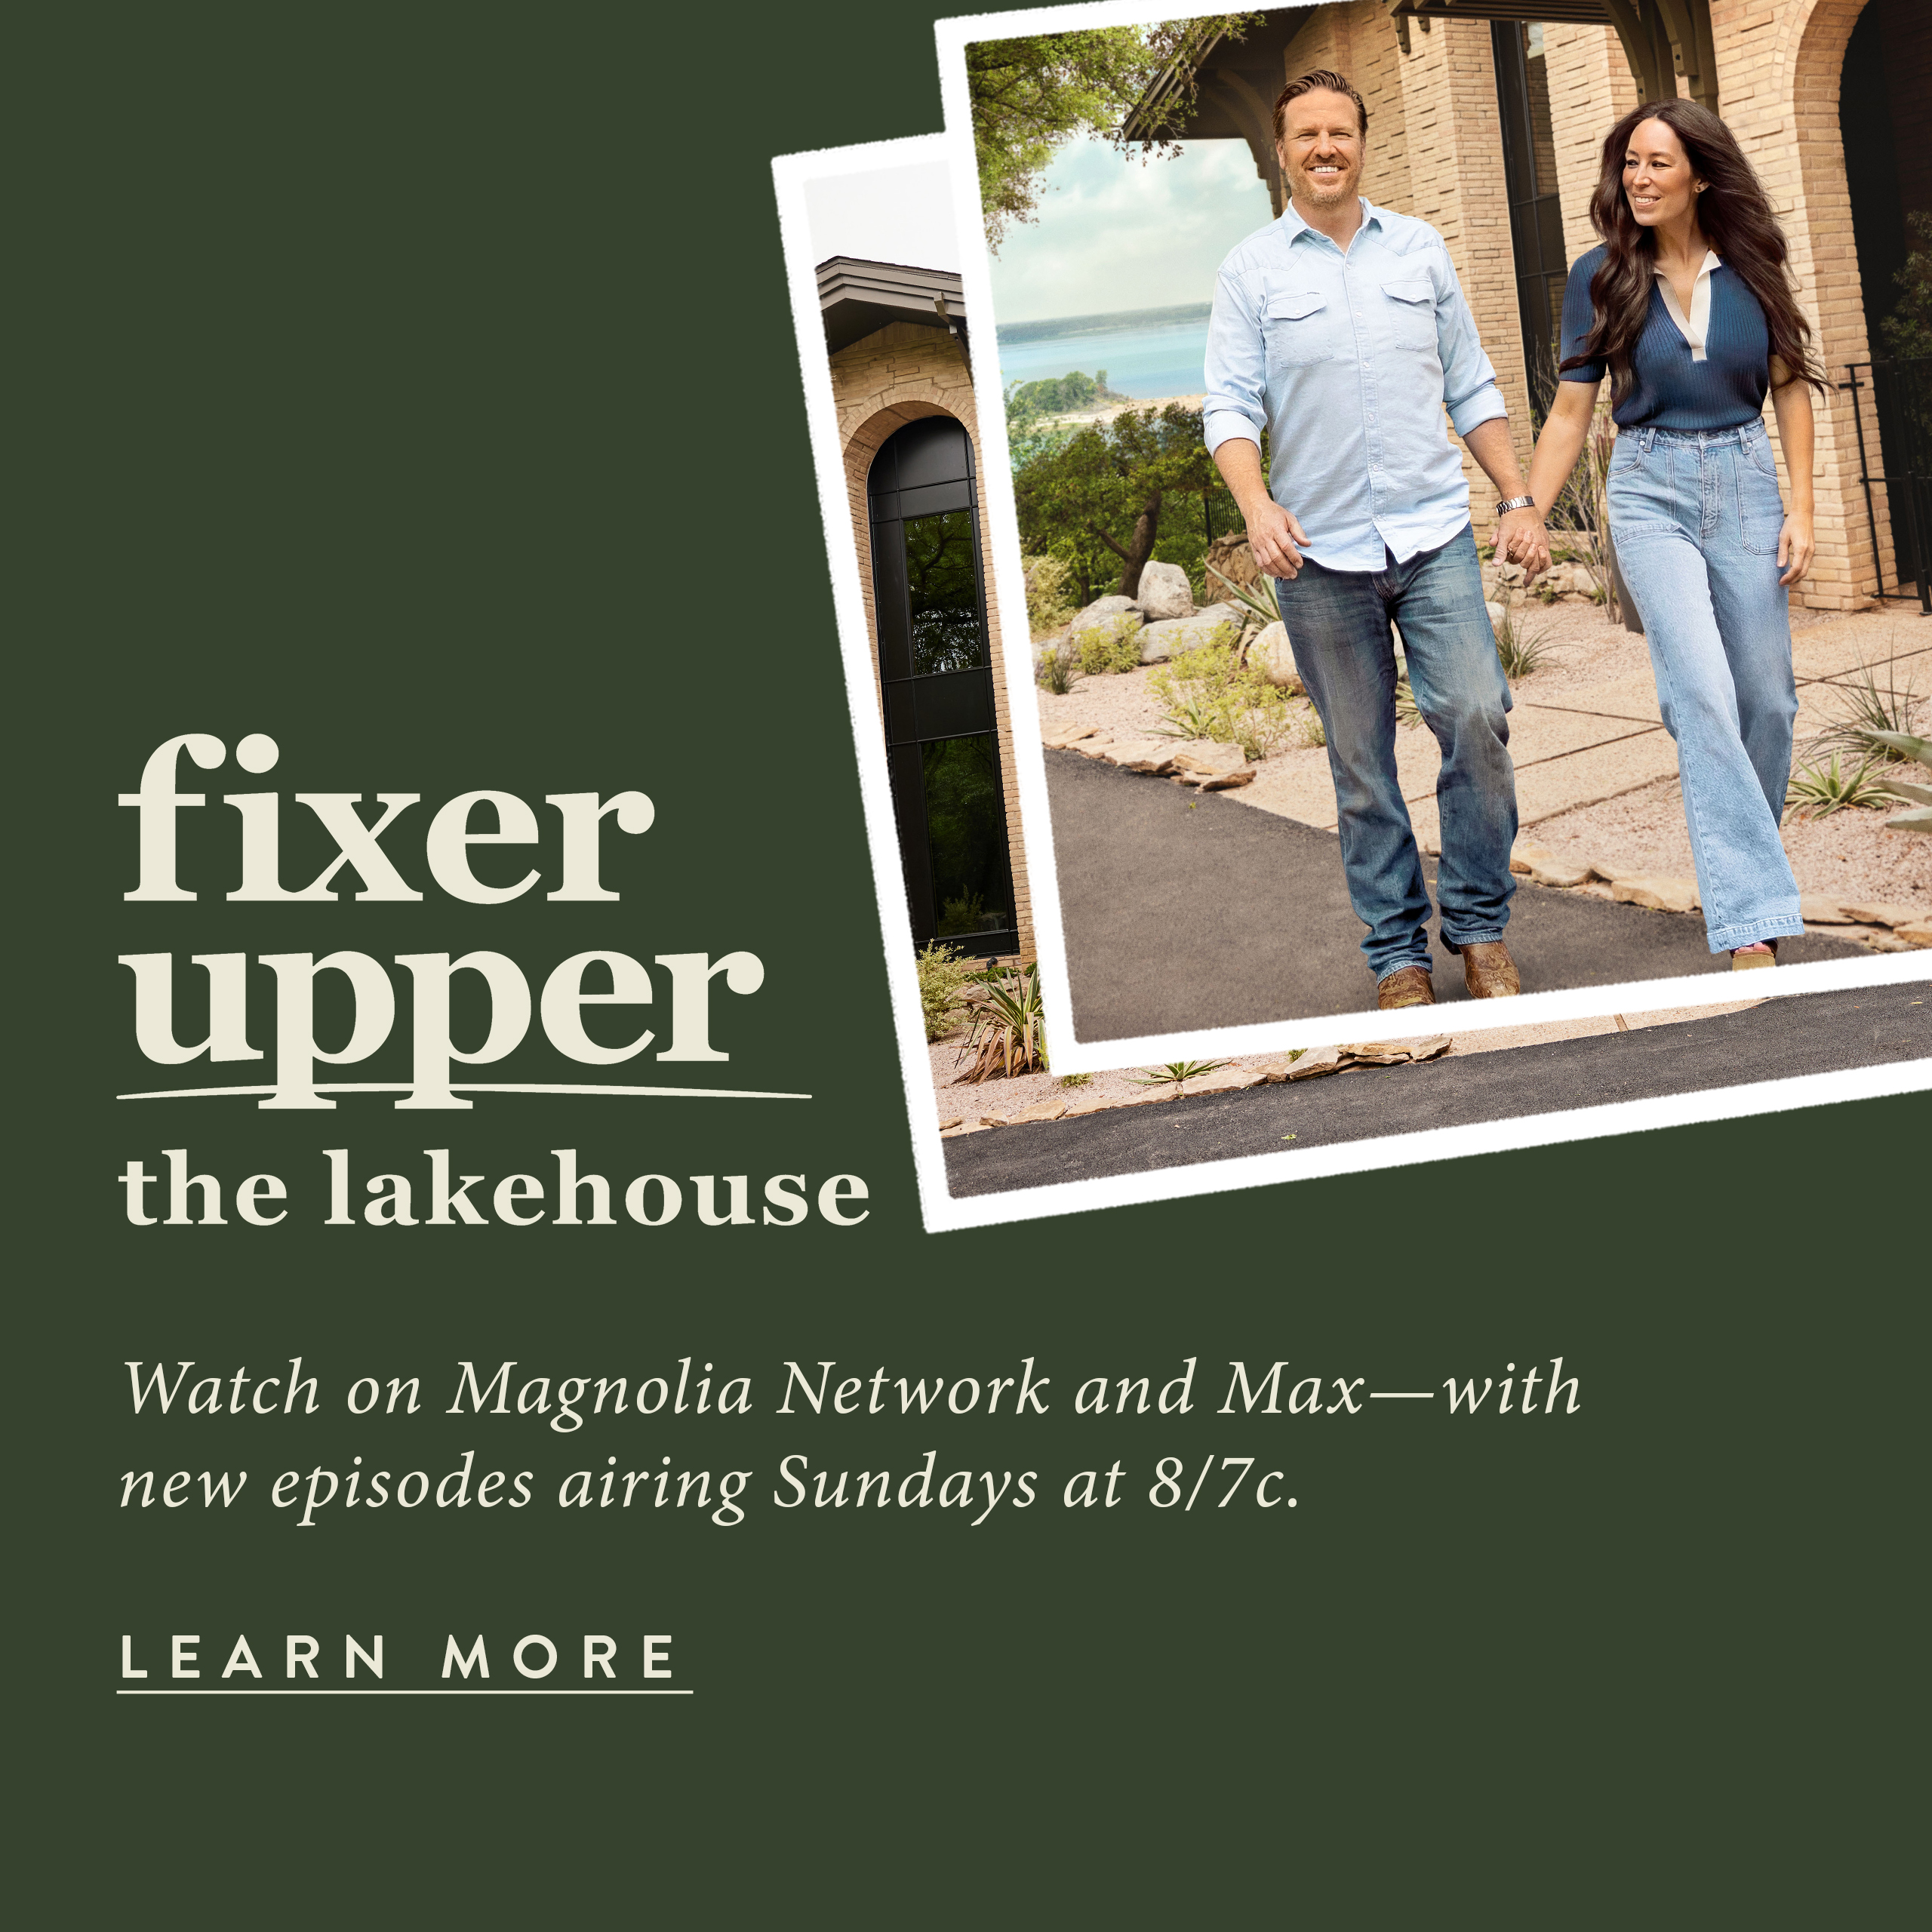 Fixer Upper the Lakehouse.  Watch on Magnolia Network and Max - with new episodes airing Sundays at 8/7c.  Learn more.